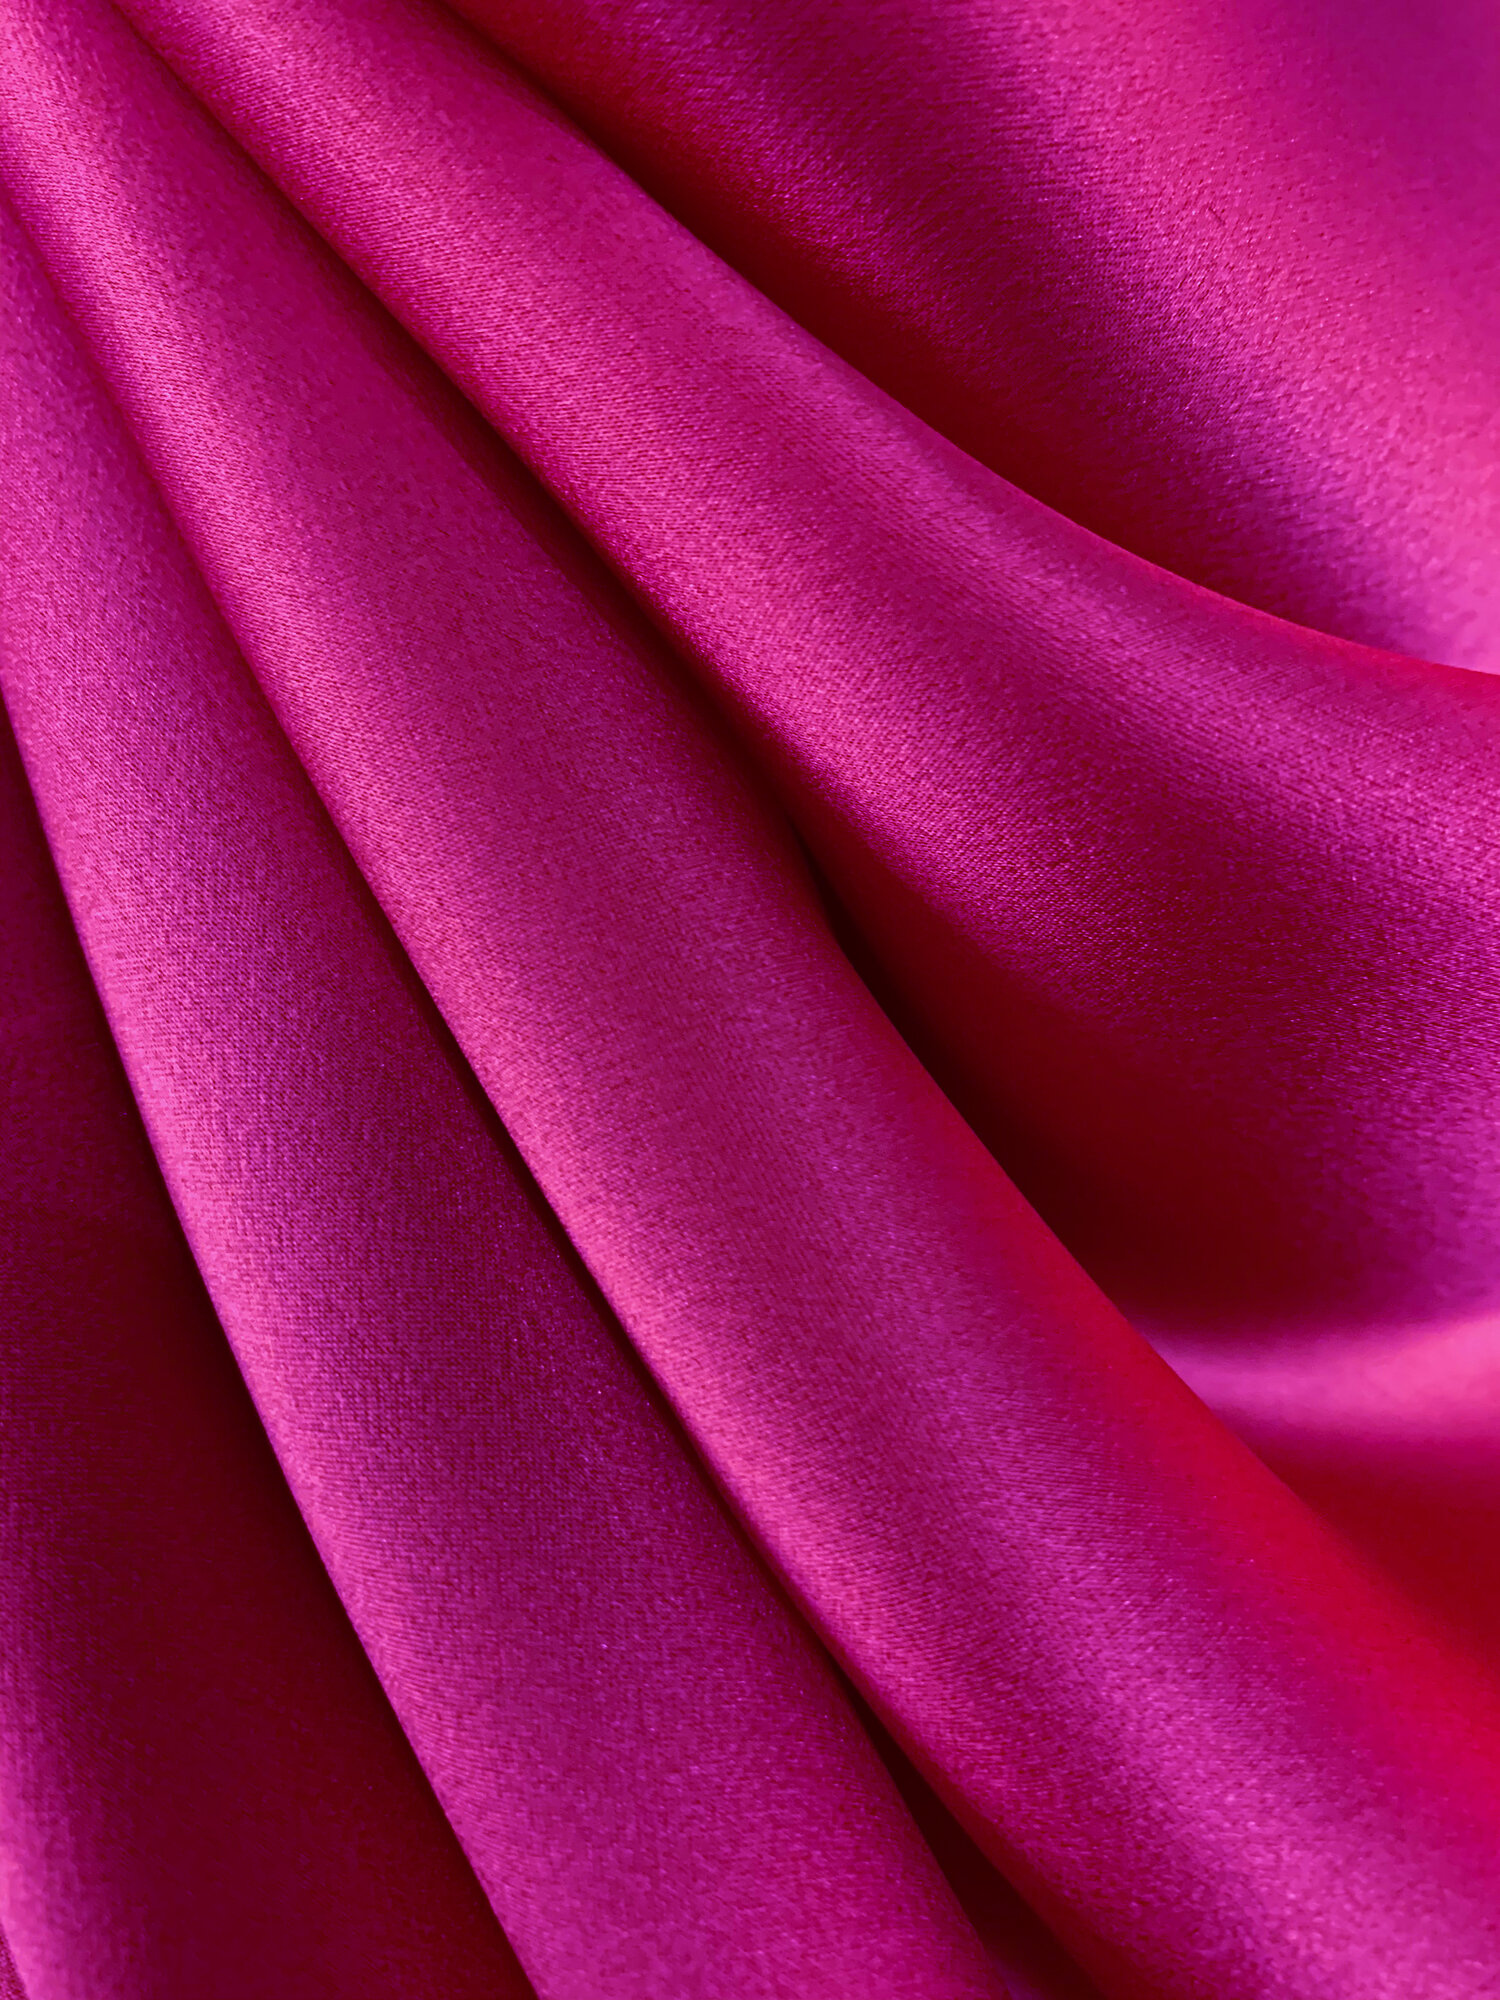 samples of Silk - PURE MULBERRY SILK fabric by the yard - Floral Silk